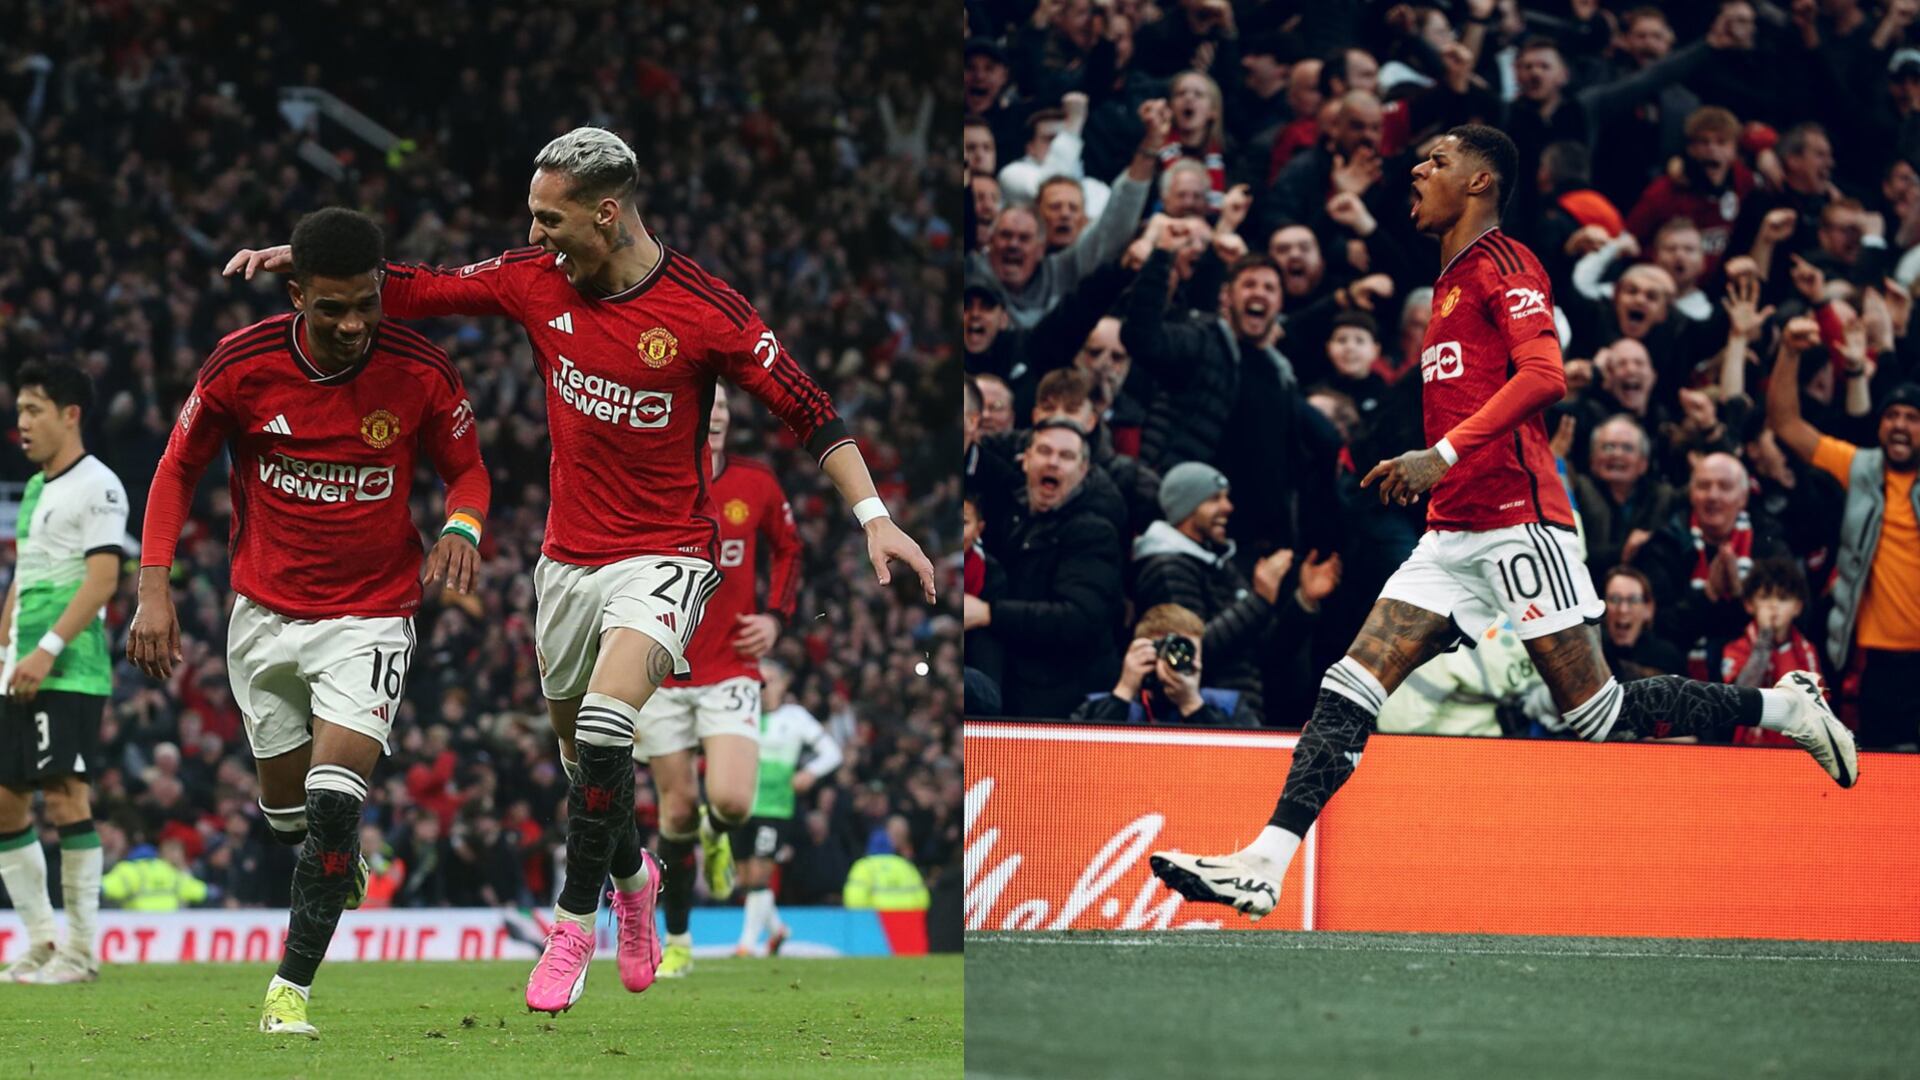 DRAMA! Man United defeats Liverpool 4-3 in extra-time and advance to semifinals 